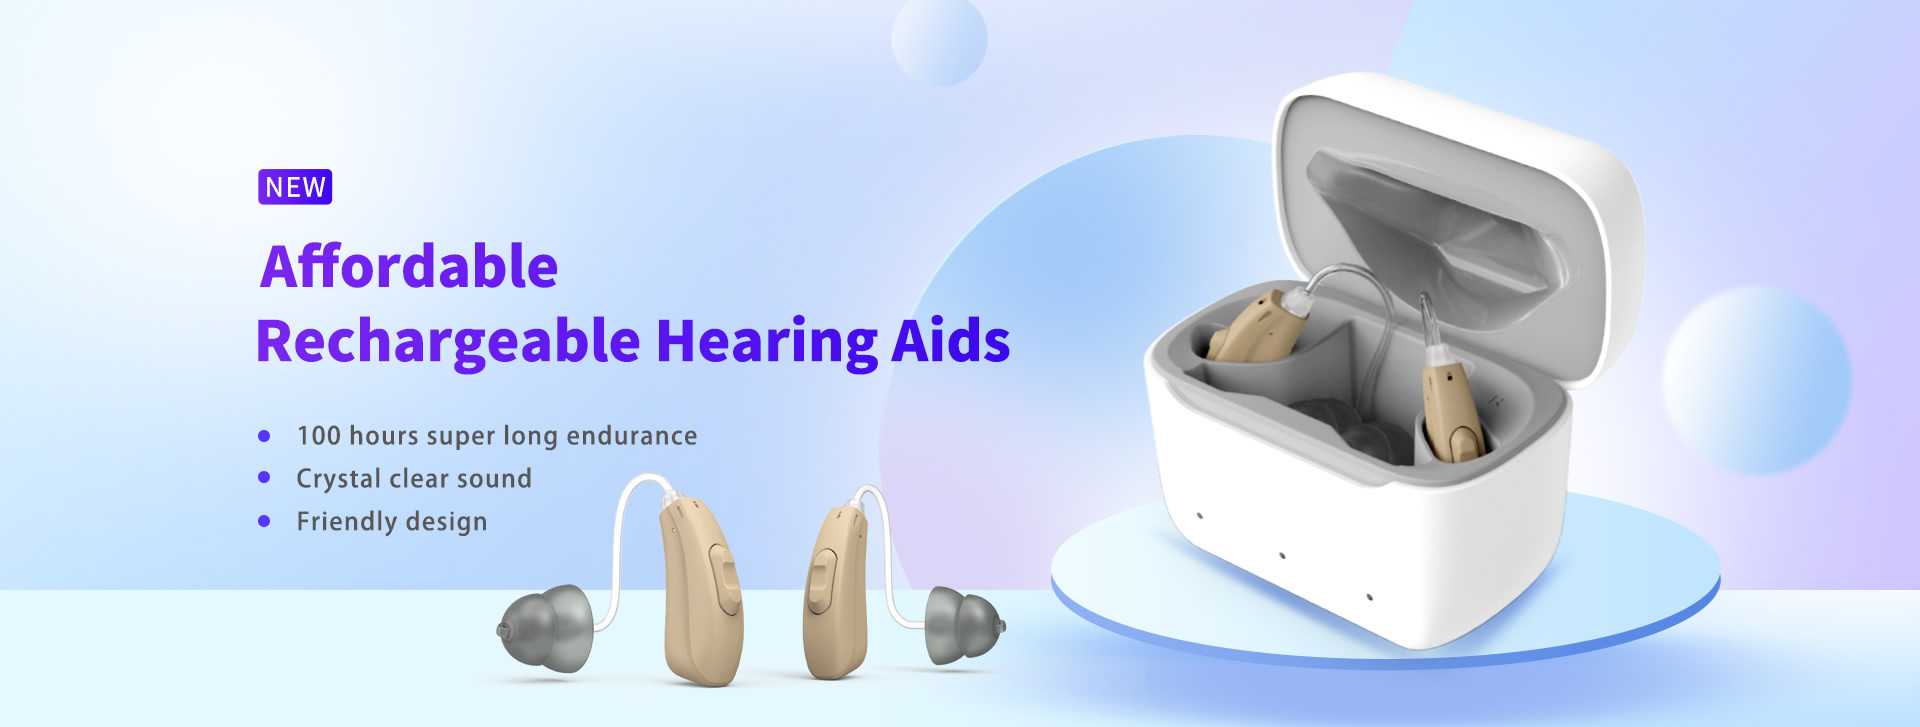 Affordable rechargeable hearing aids with 100 hours of battery life